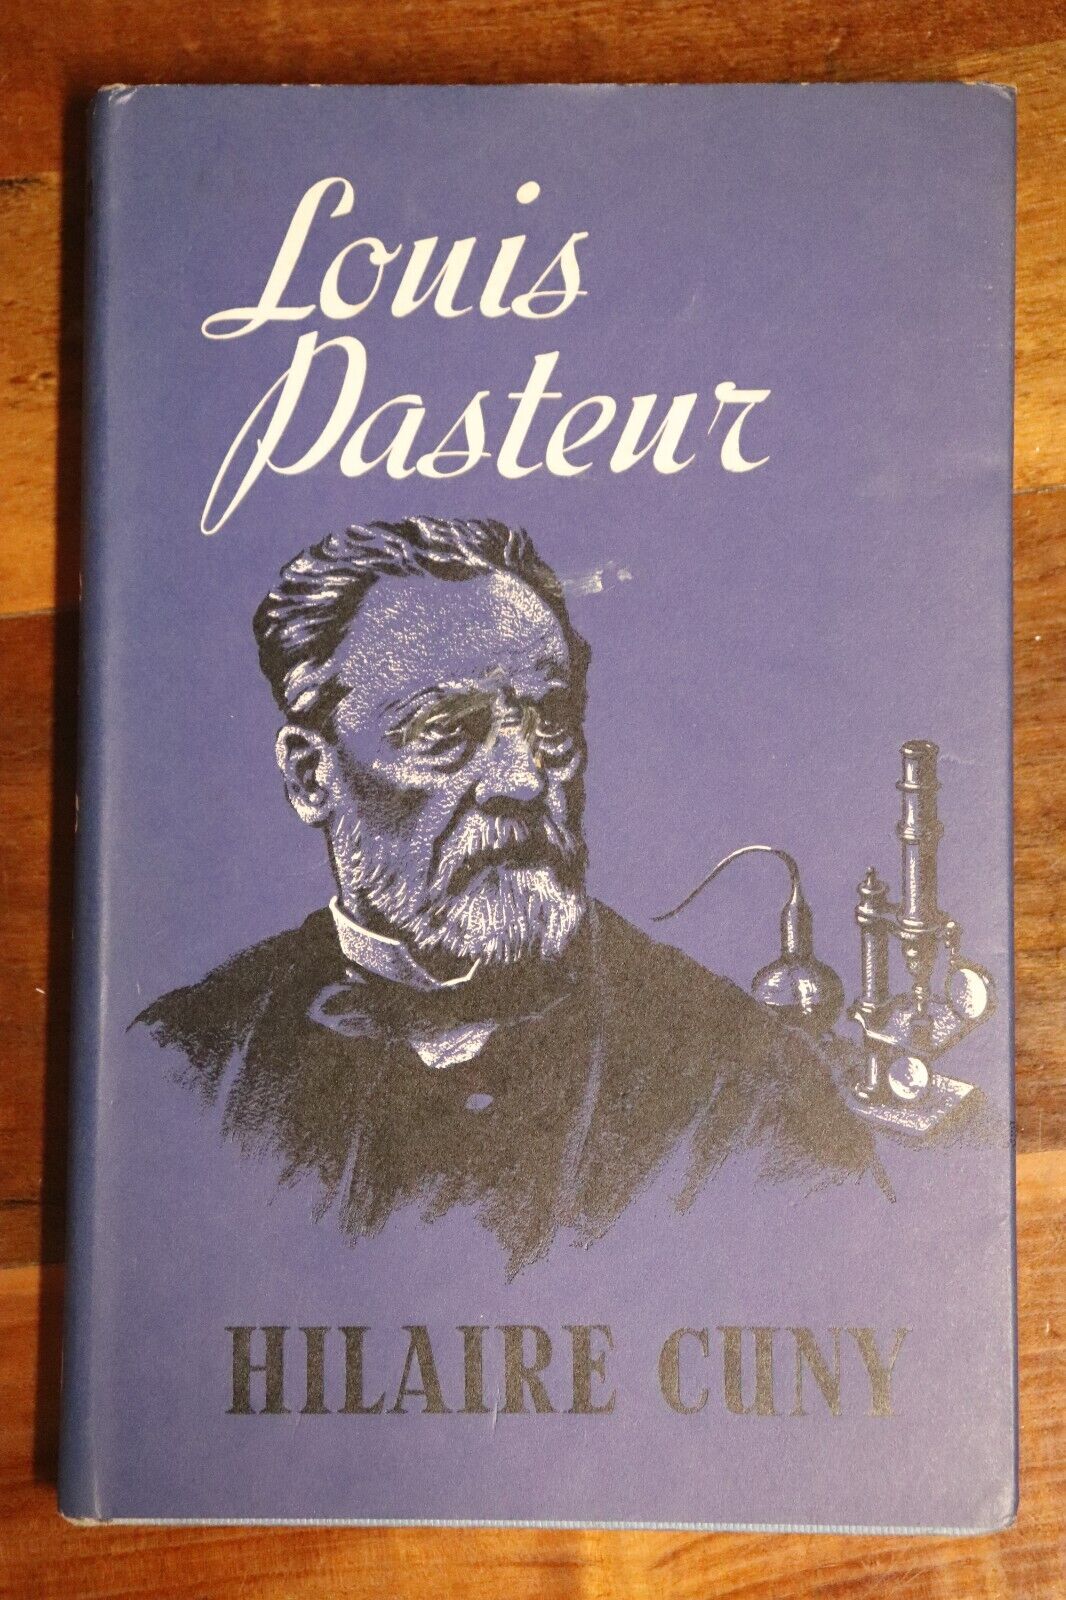 Louis Pasteur: The Man & His Theories by H Cuny - 1965 - Vintage Science Book